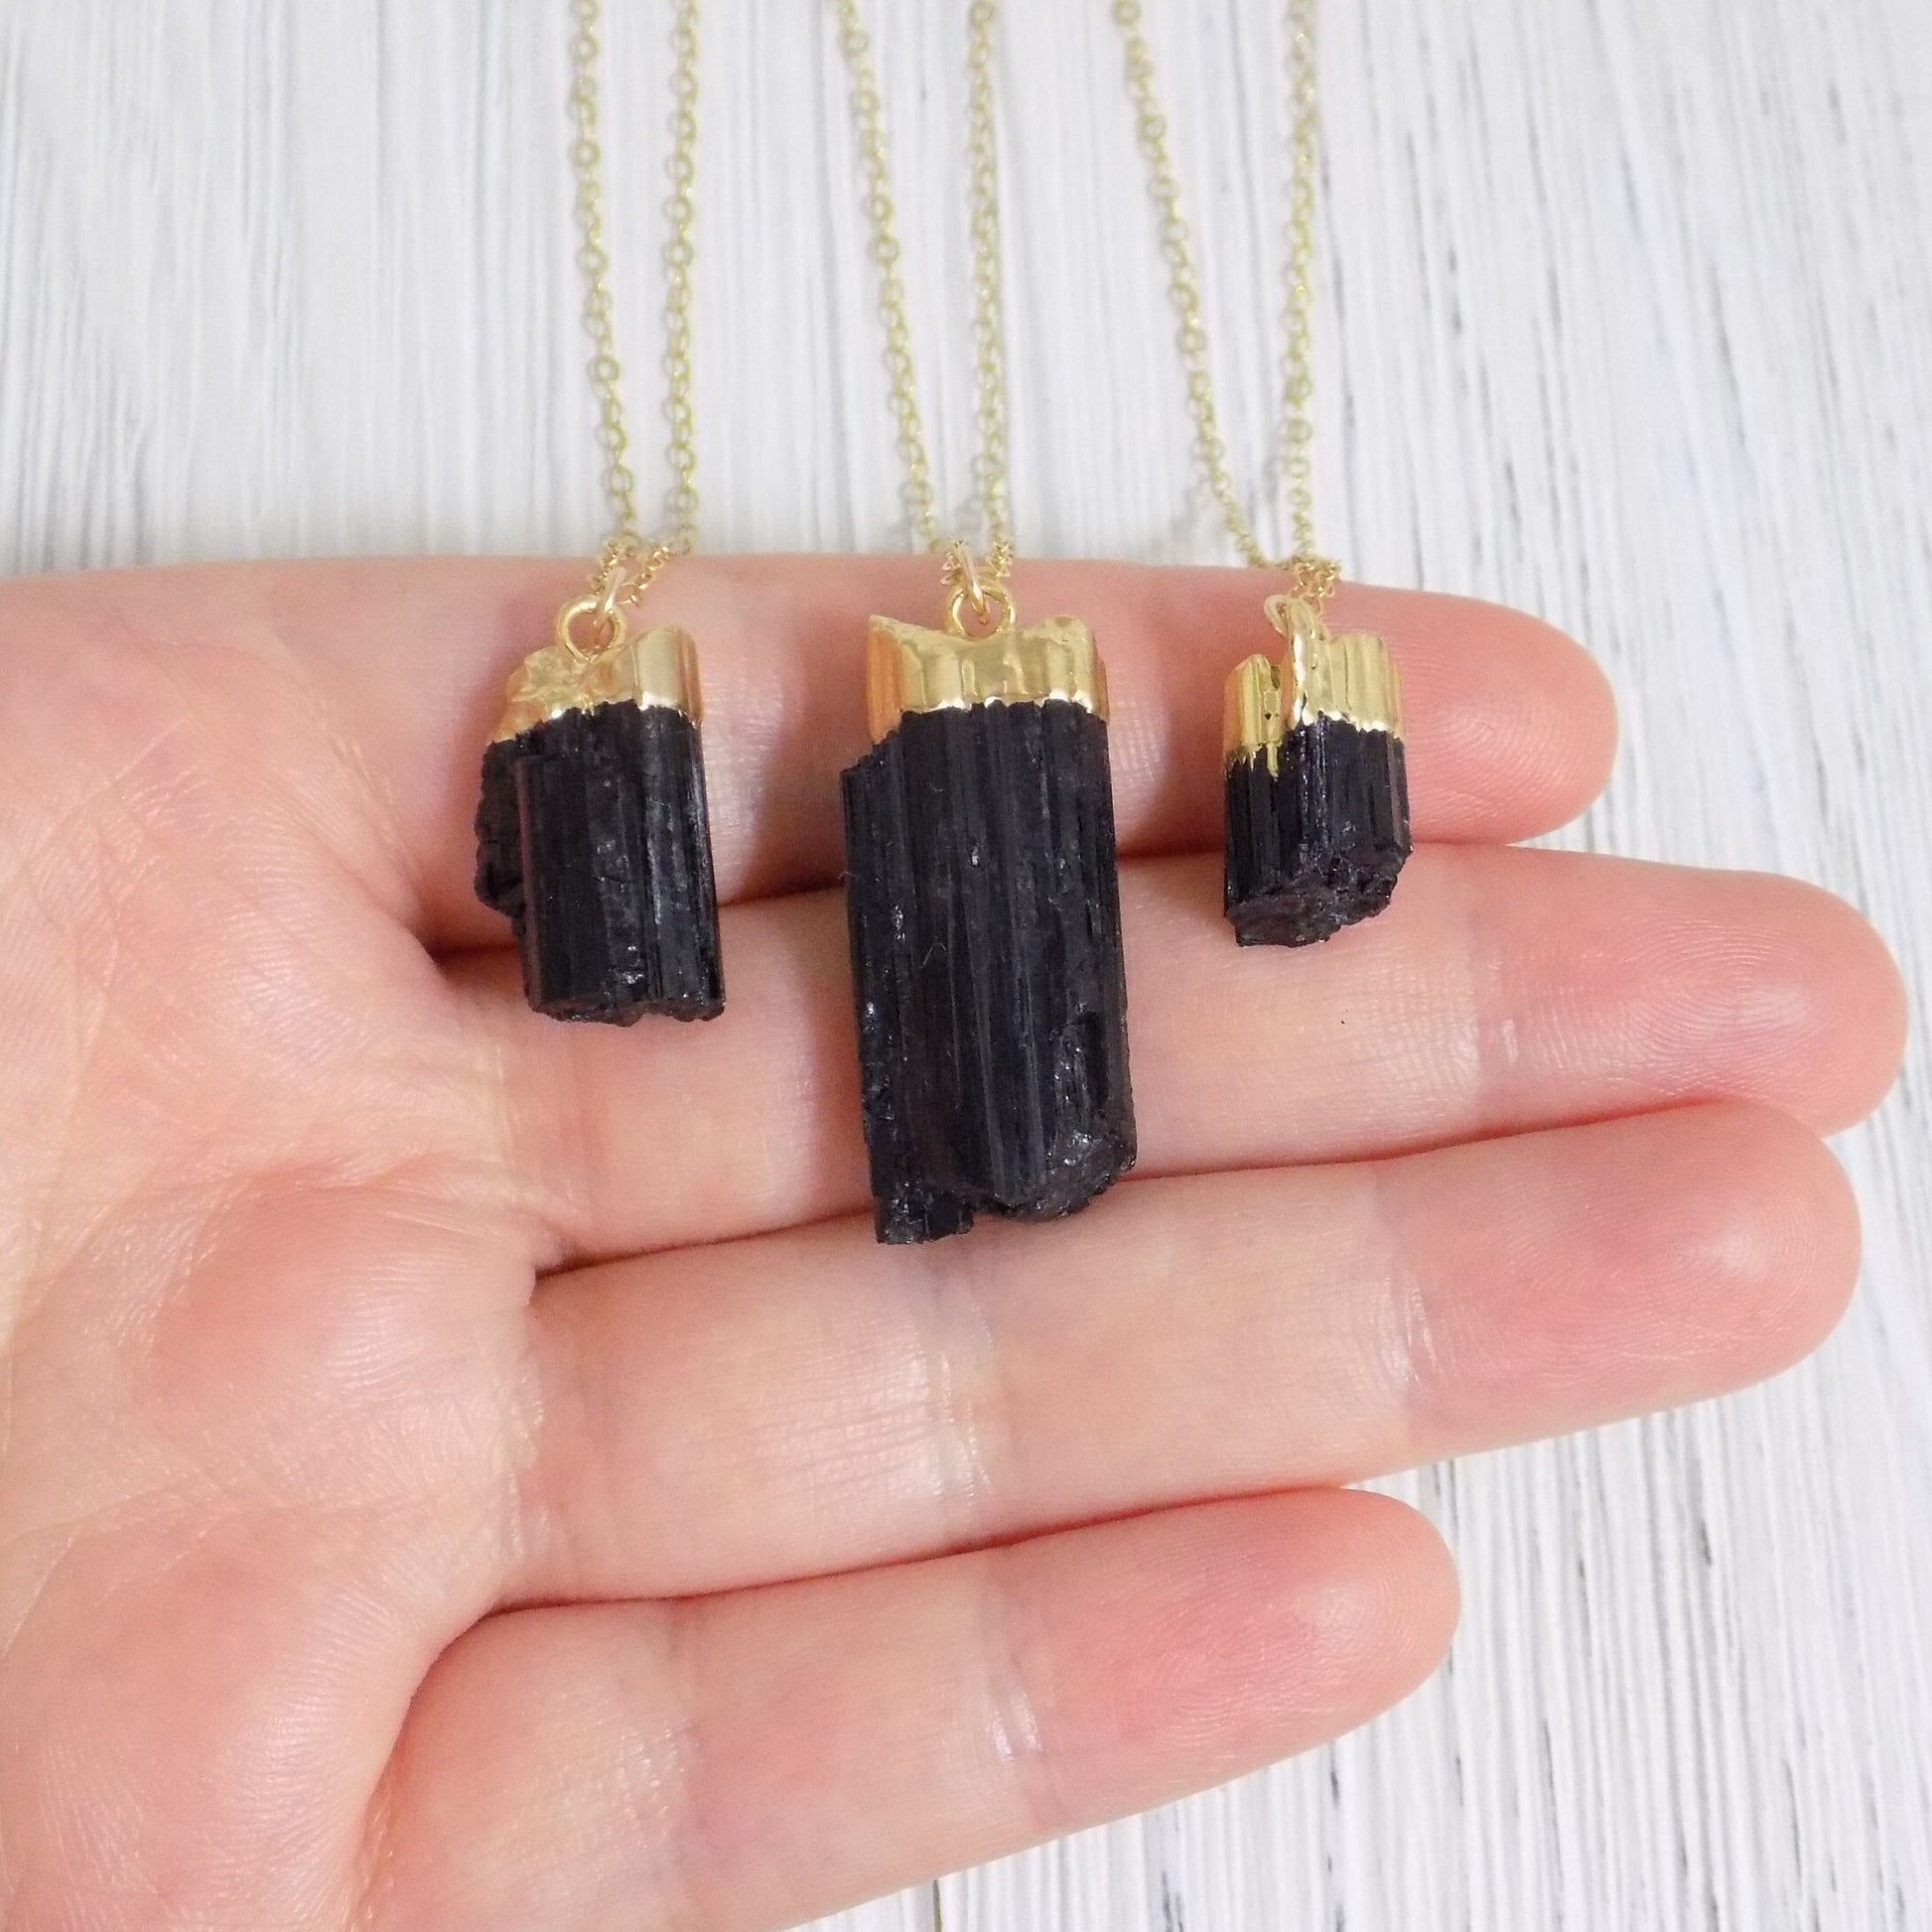 Raw Black Tourmaline Pendant Necklace Gold - Christmas Gifts For Her